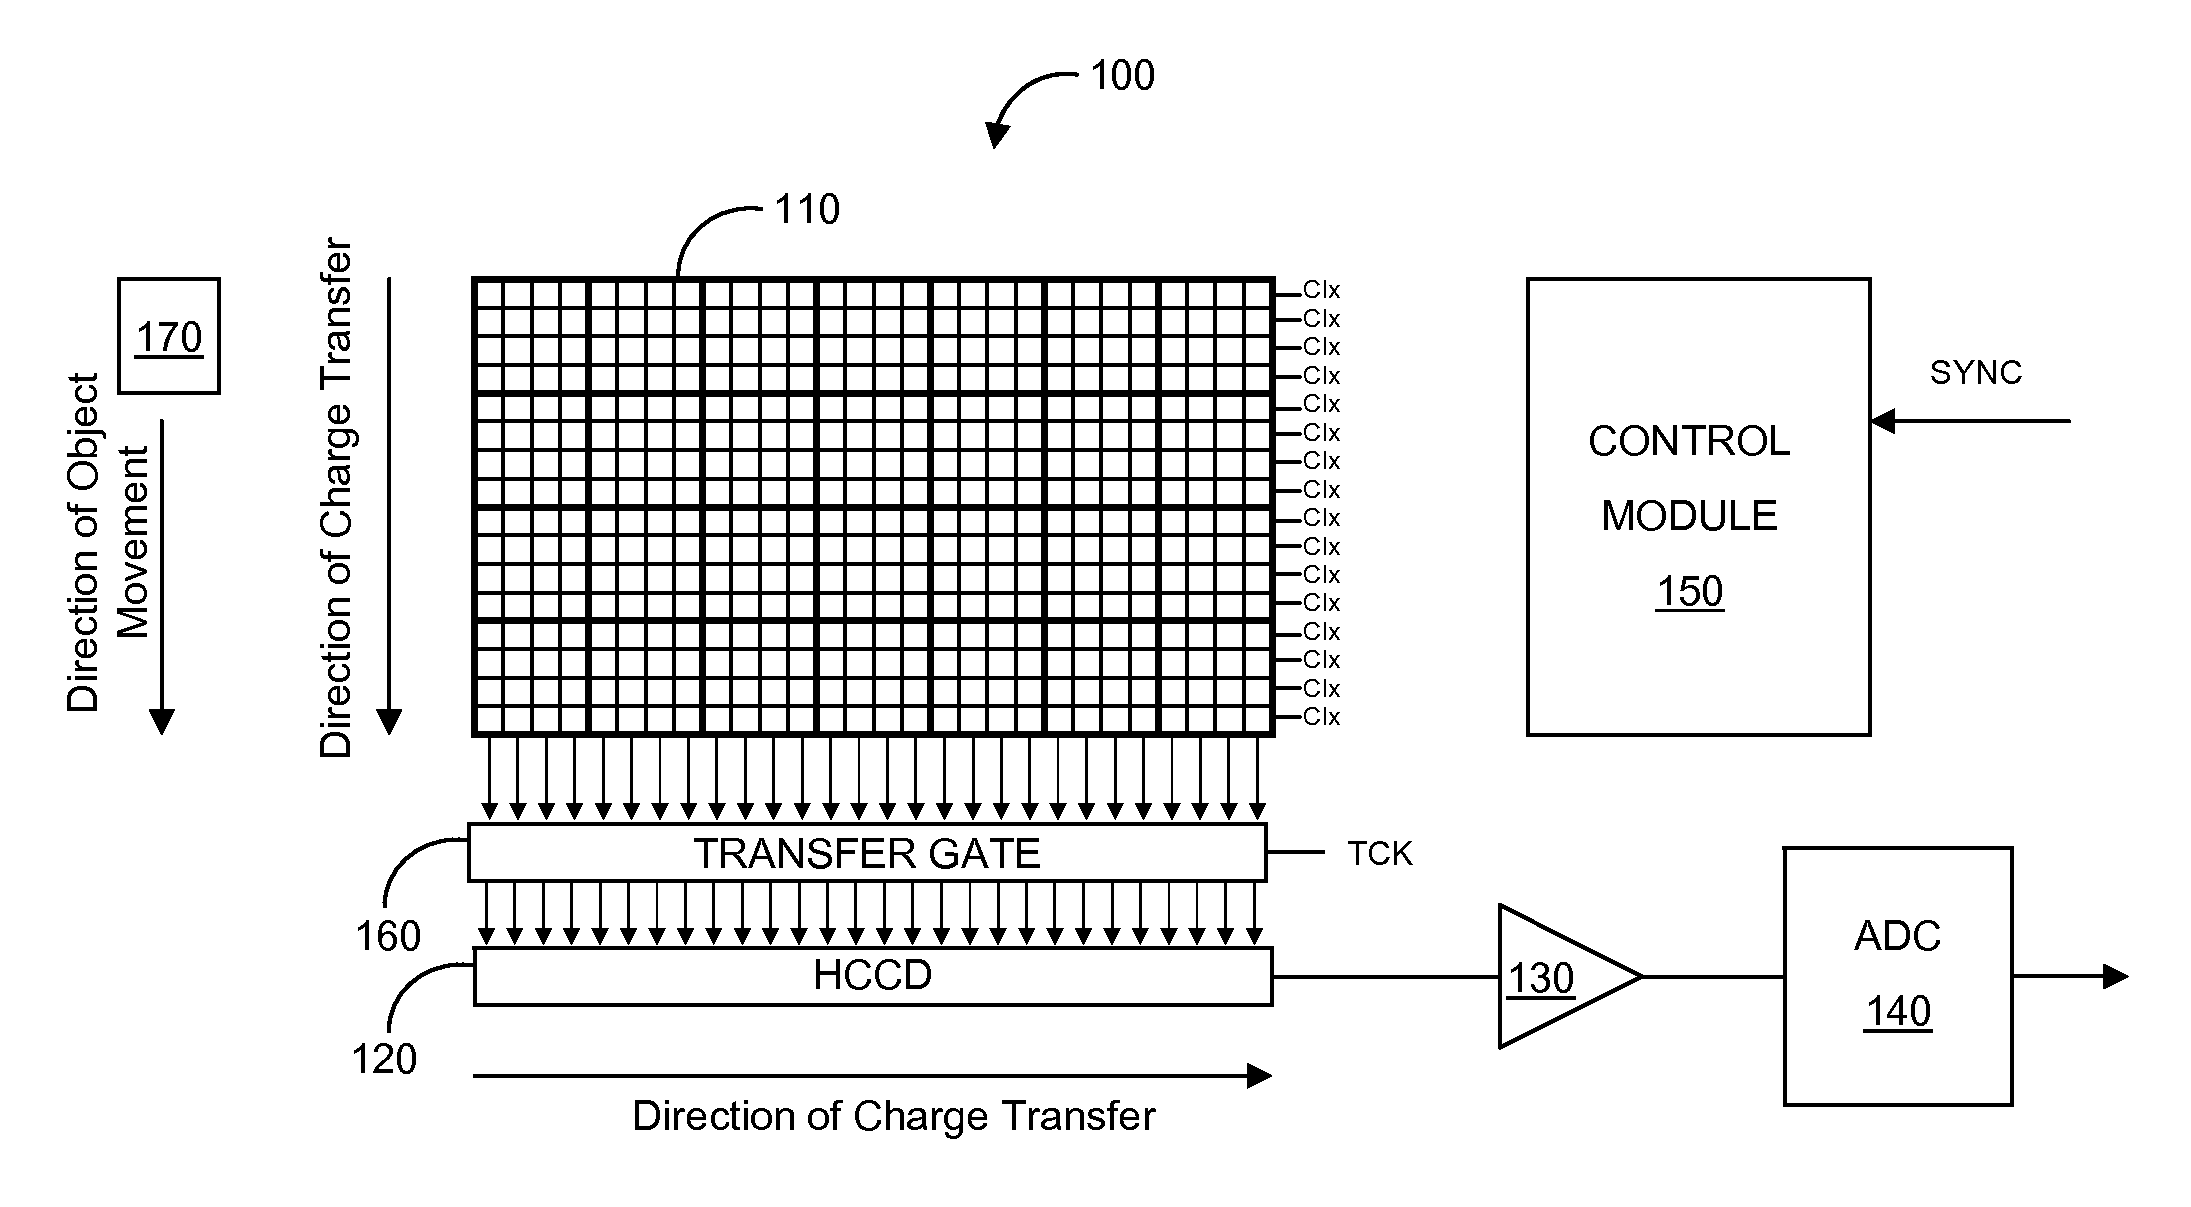 Continuous clocking mode for tdi binning operation of ccd image sensor